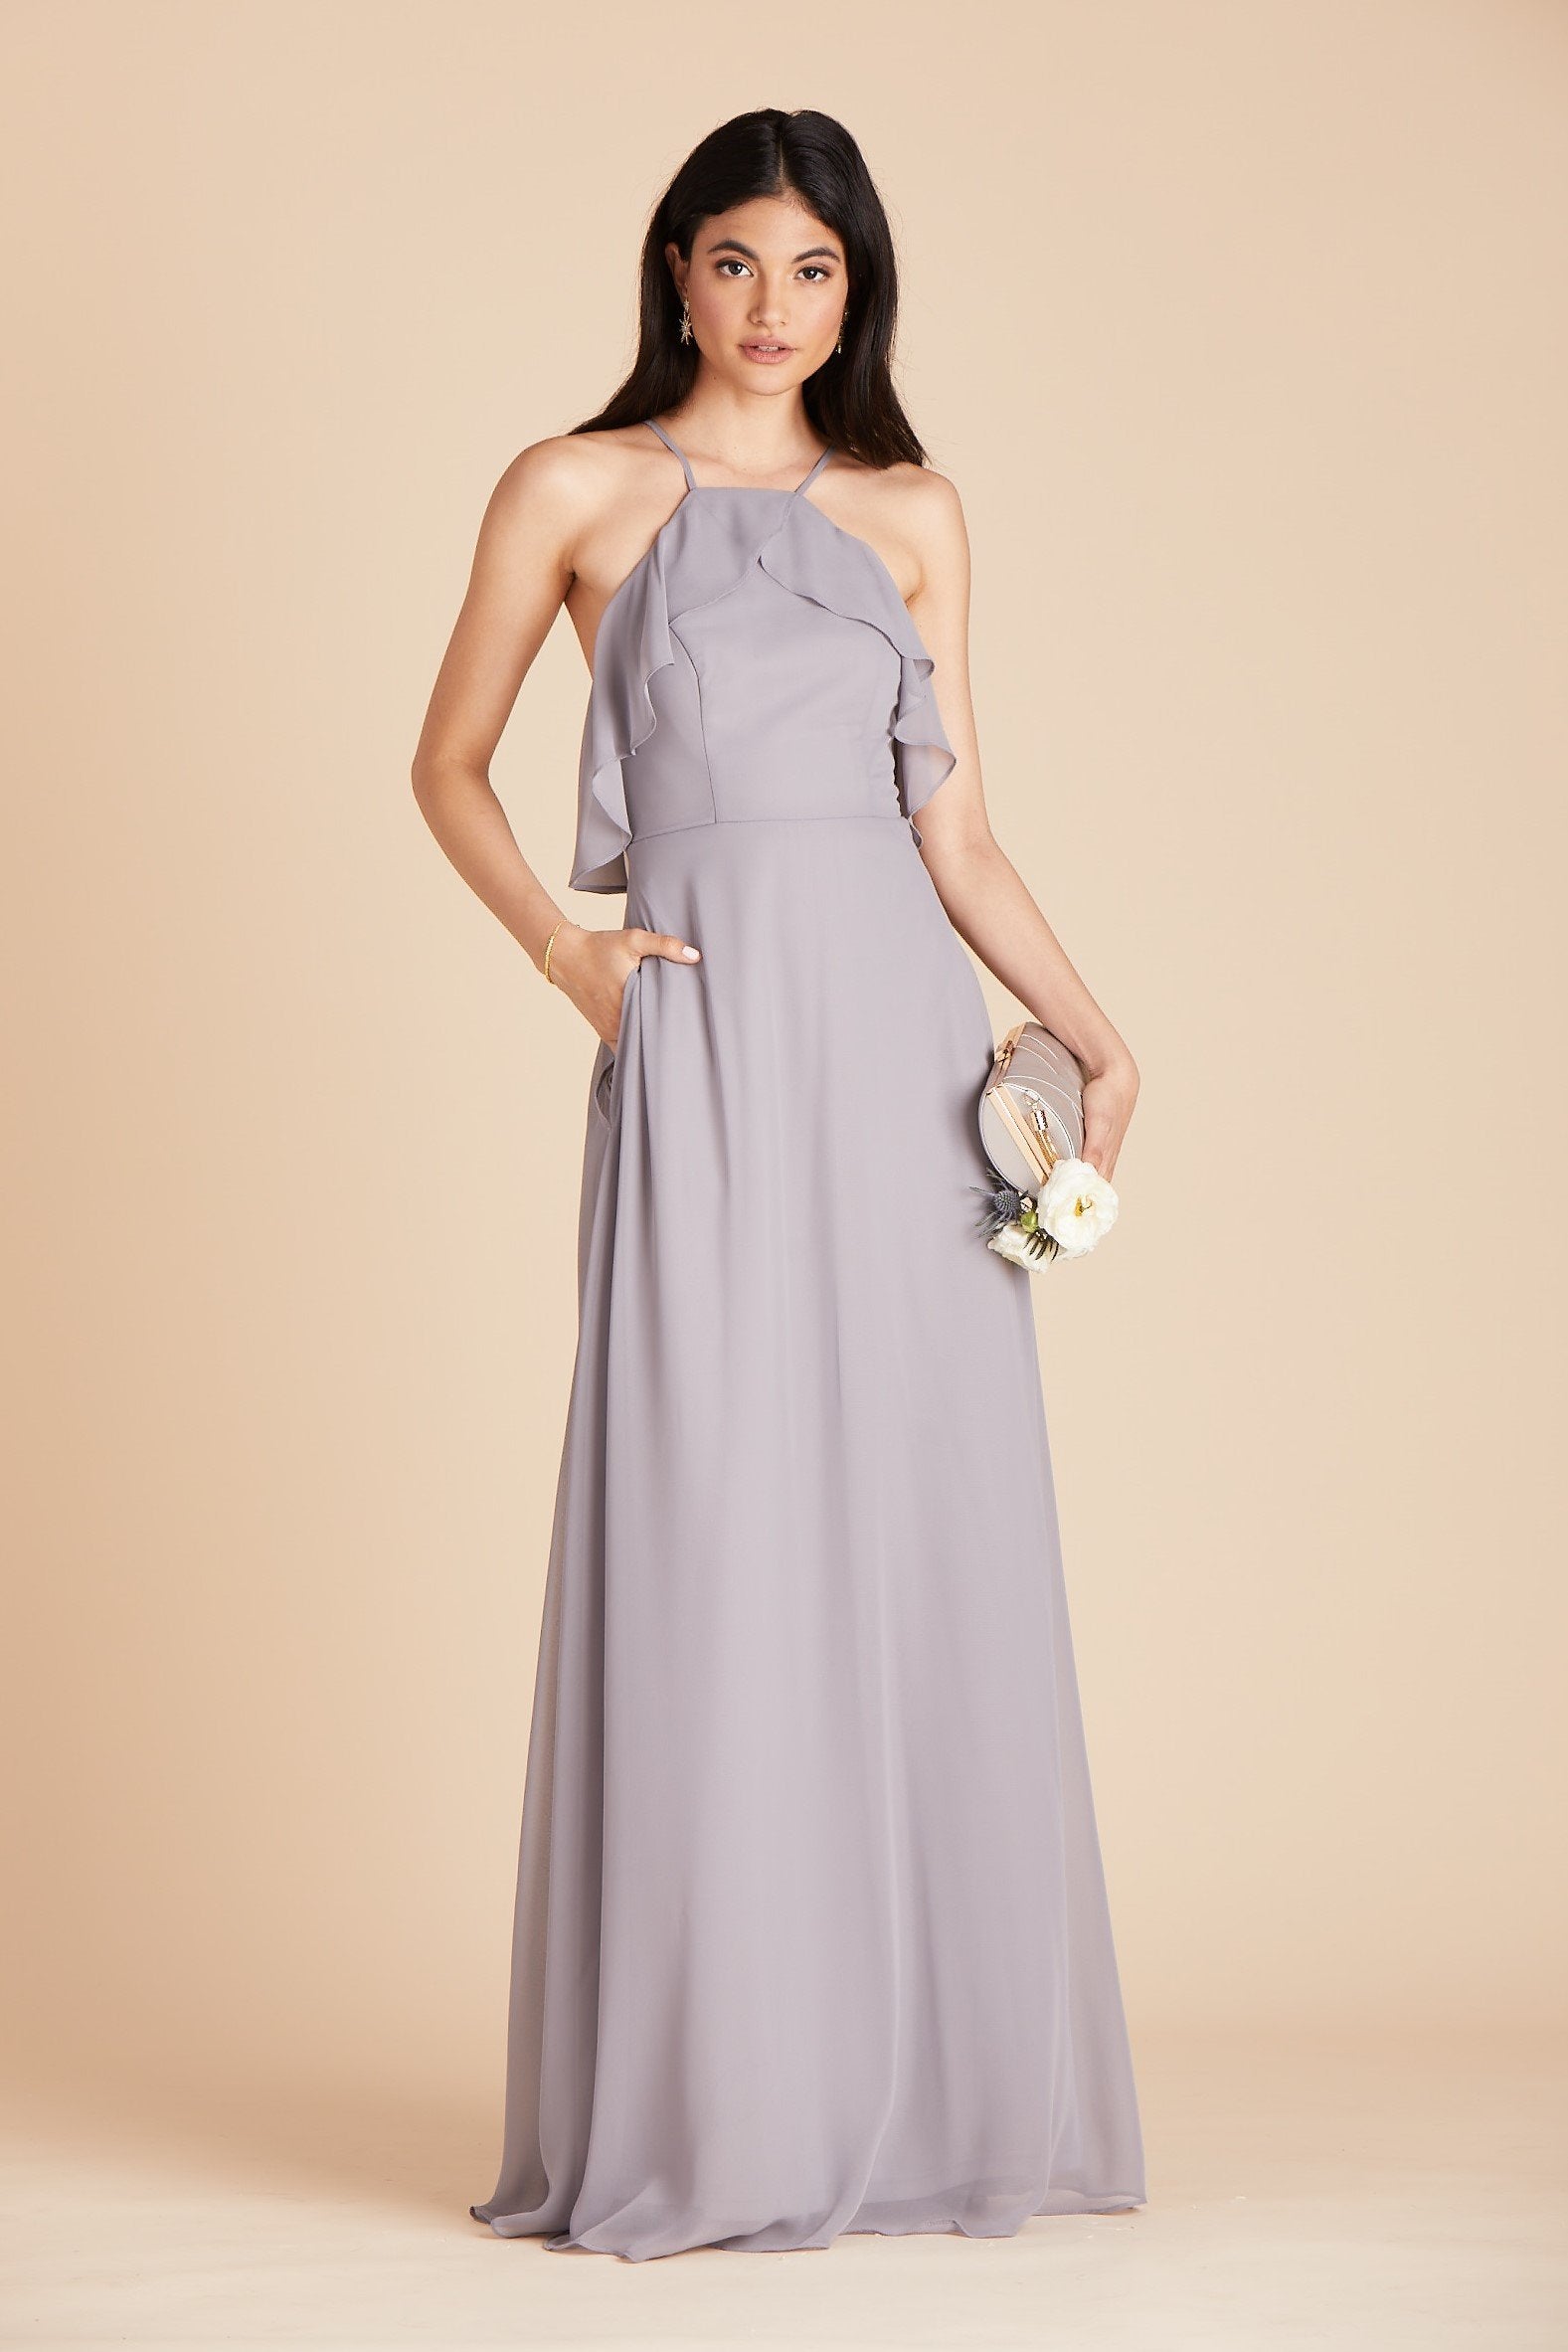 Jules bridesmaid dress in silver chiffon by Birdy Grey, front view with hand in pocket